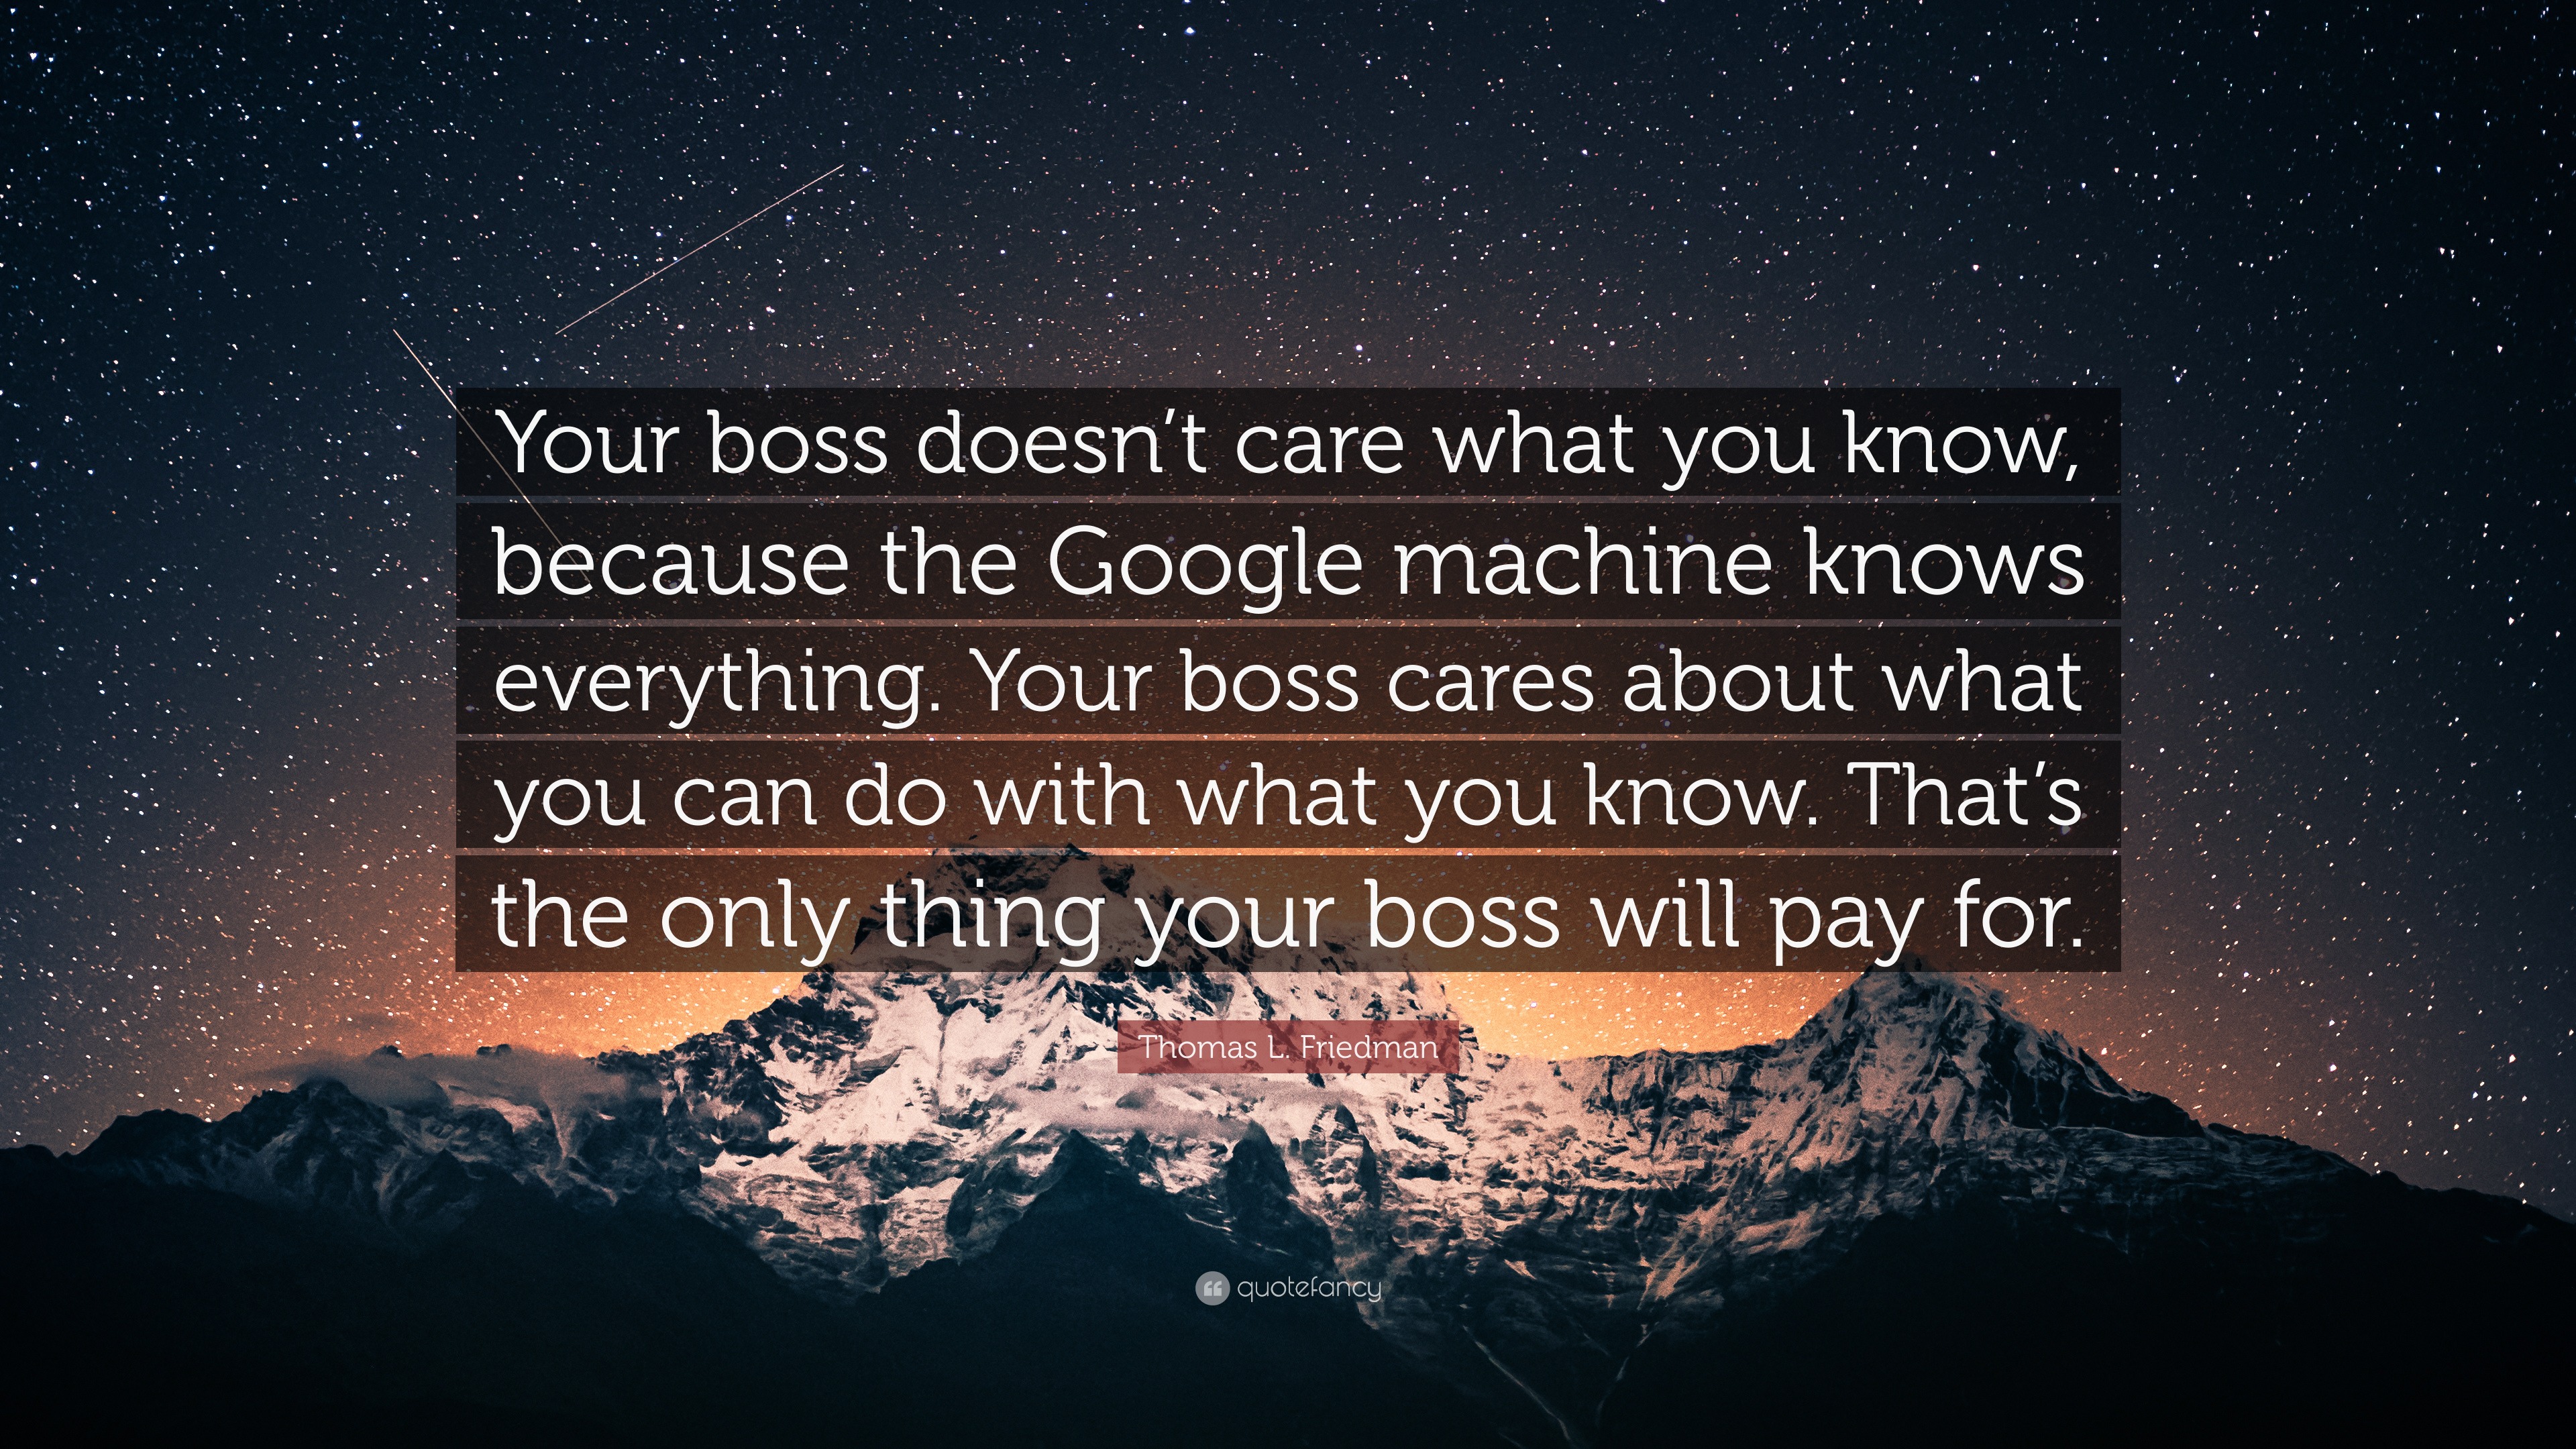 Thomas L Friedman Quote Your Boss Doesn T Care What You Know Because The Google Machine Knows Everything Your Boss Cares About What You Can Do